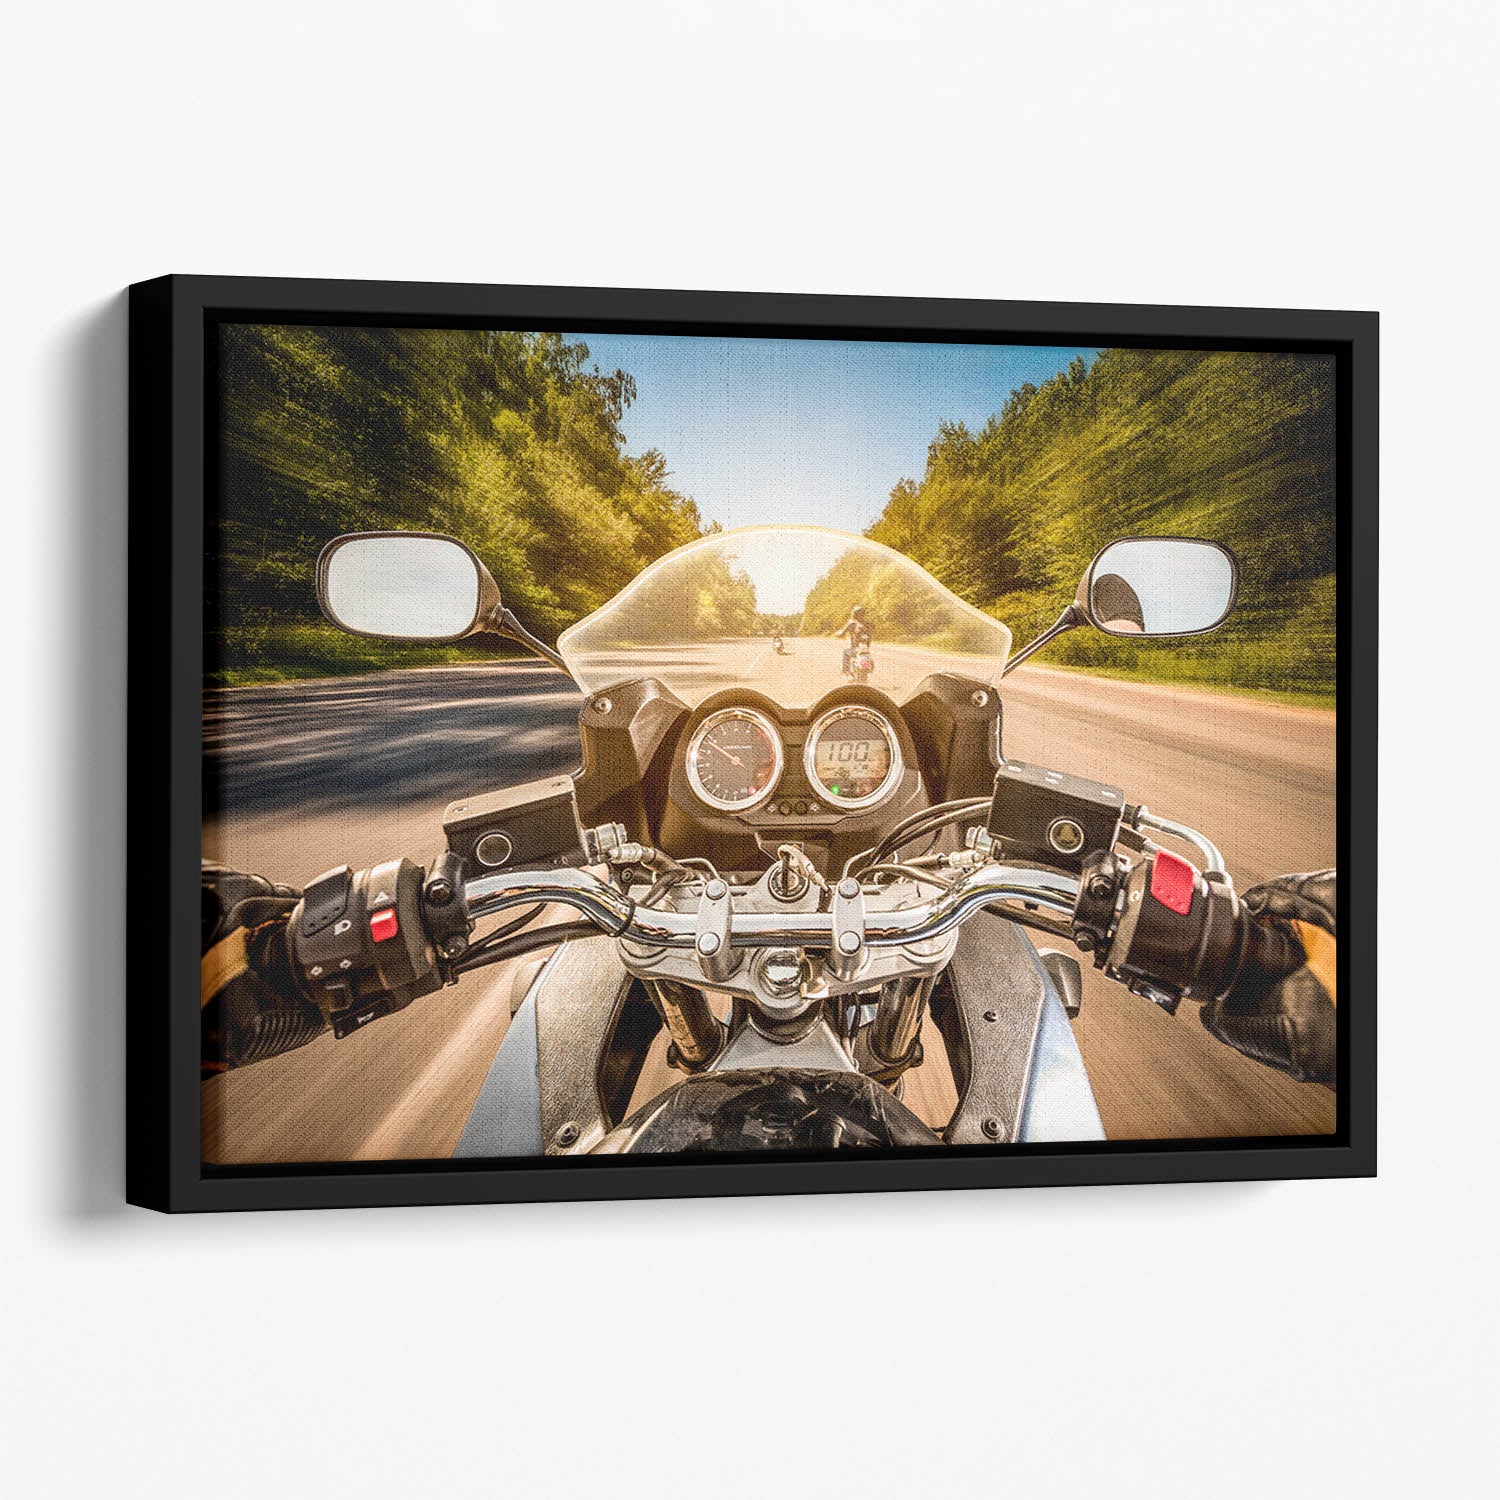 First Person Motorbike Ride Floating Framed Canvas